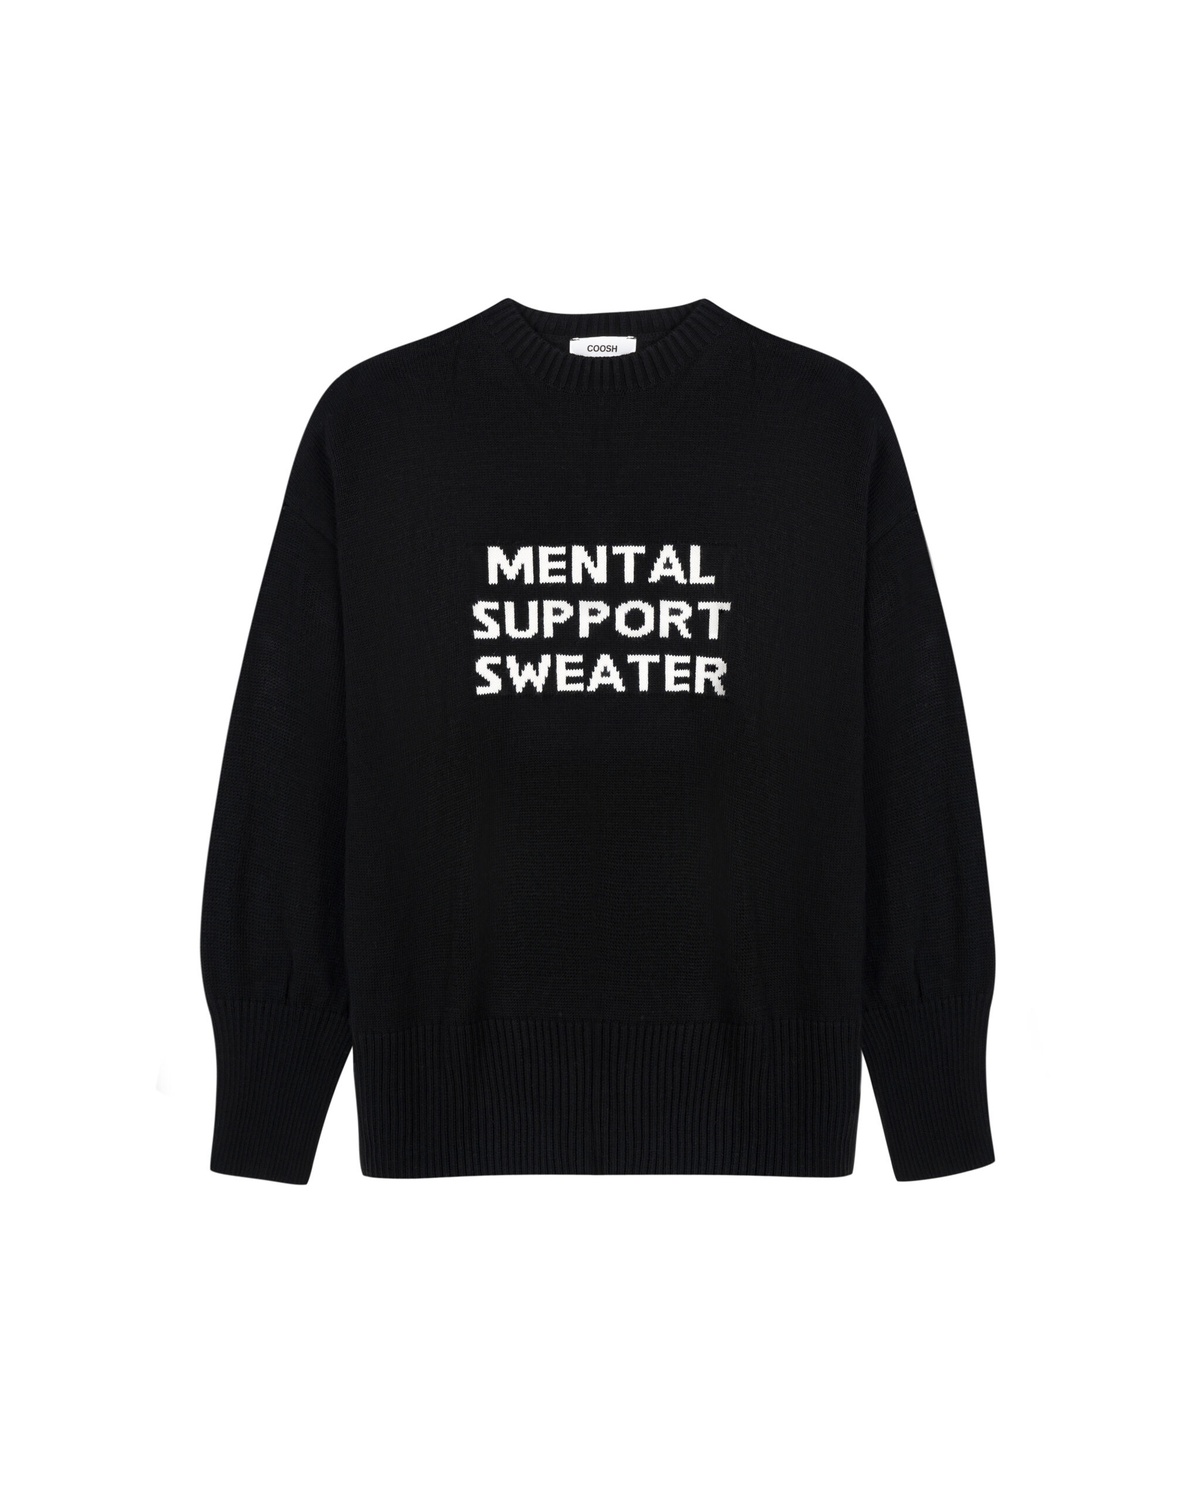 Светр "MENTAL SUPPORT SWEATER"